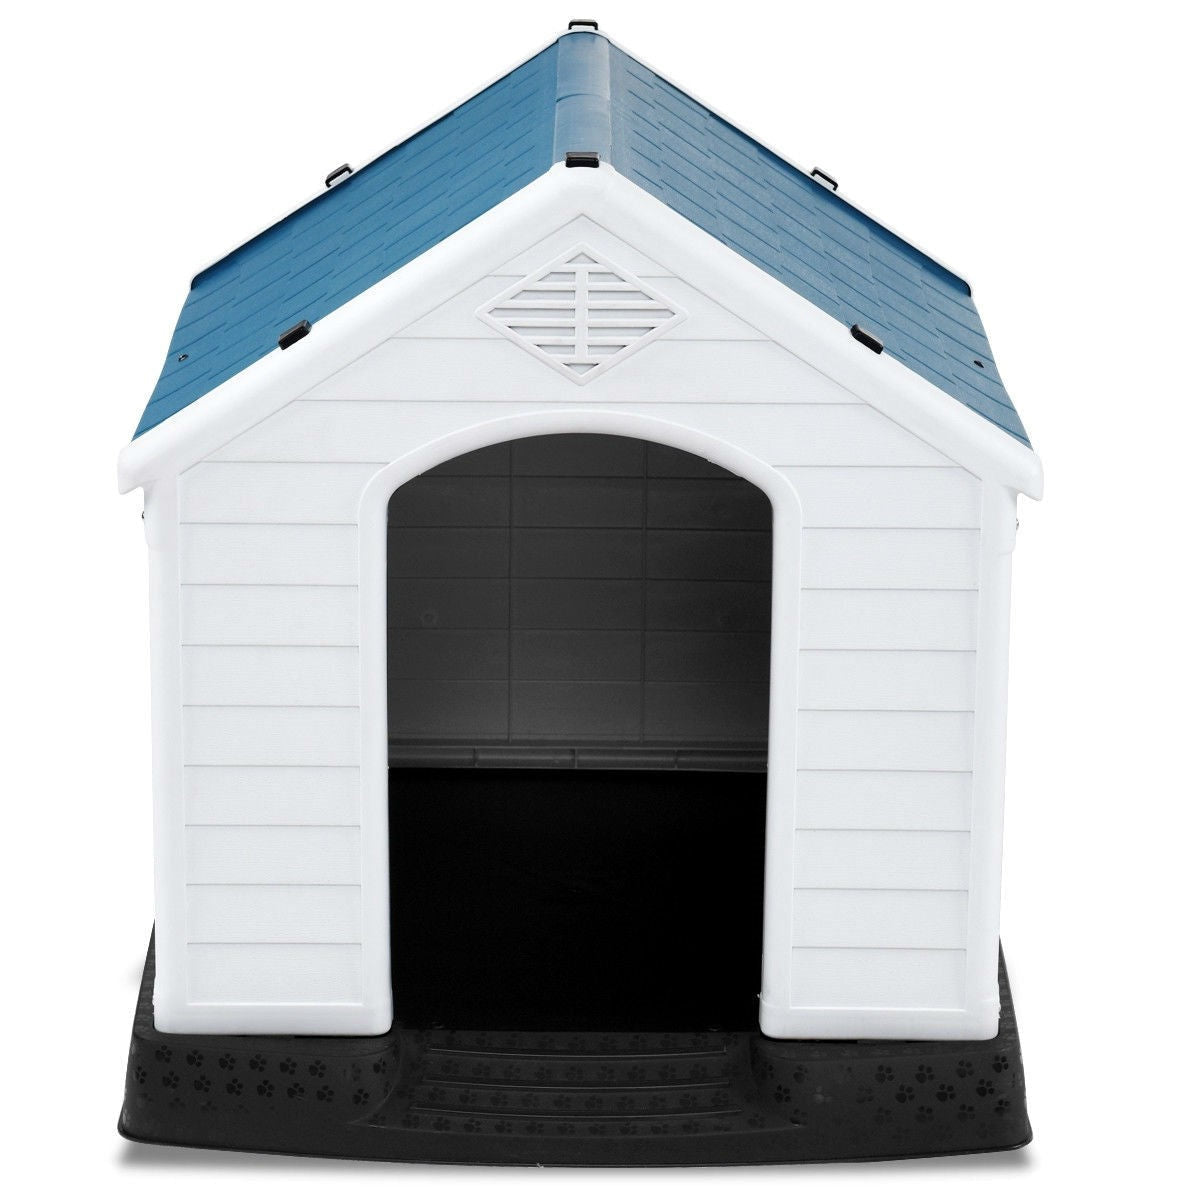 Outdoor > Dog House & Cat Houses - Small Outdoor Heavy Duty Blue And White Plastic Dog House